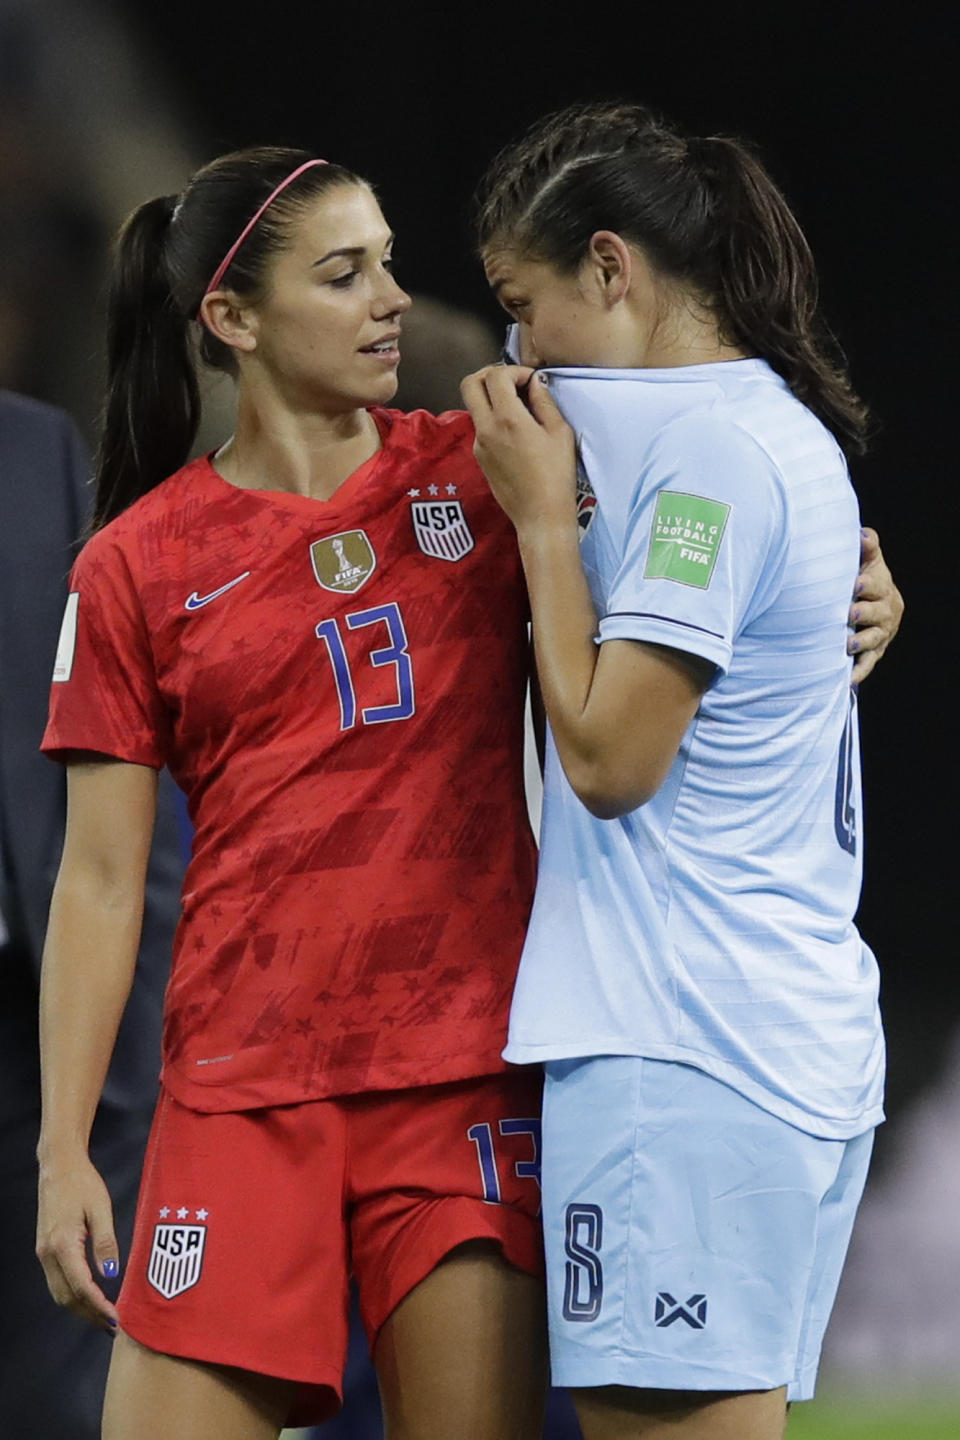 United States'Alex Morgan hugs Thailand's Miranda Nild at the end of the Women's World Cup Group F soccer match between United States and Thailand at the Stade Auguste-Delaune in Reims, France, Tuesday, June 11, 2019. United States beat Thailand 13-0. (AP Photo/Alessandra Tarantino)